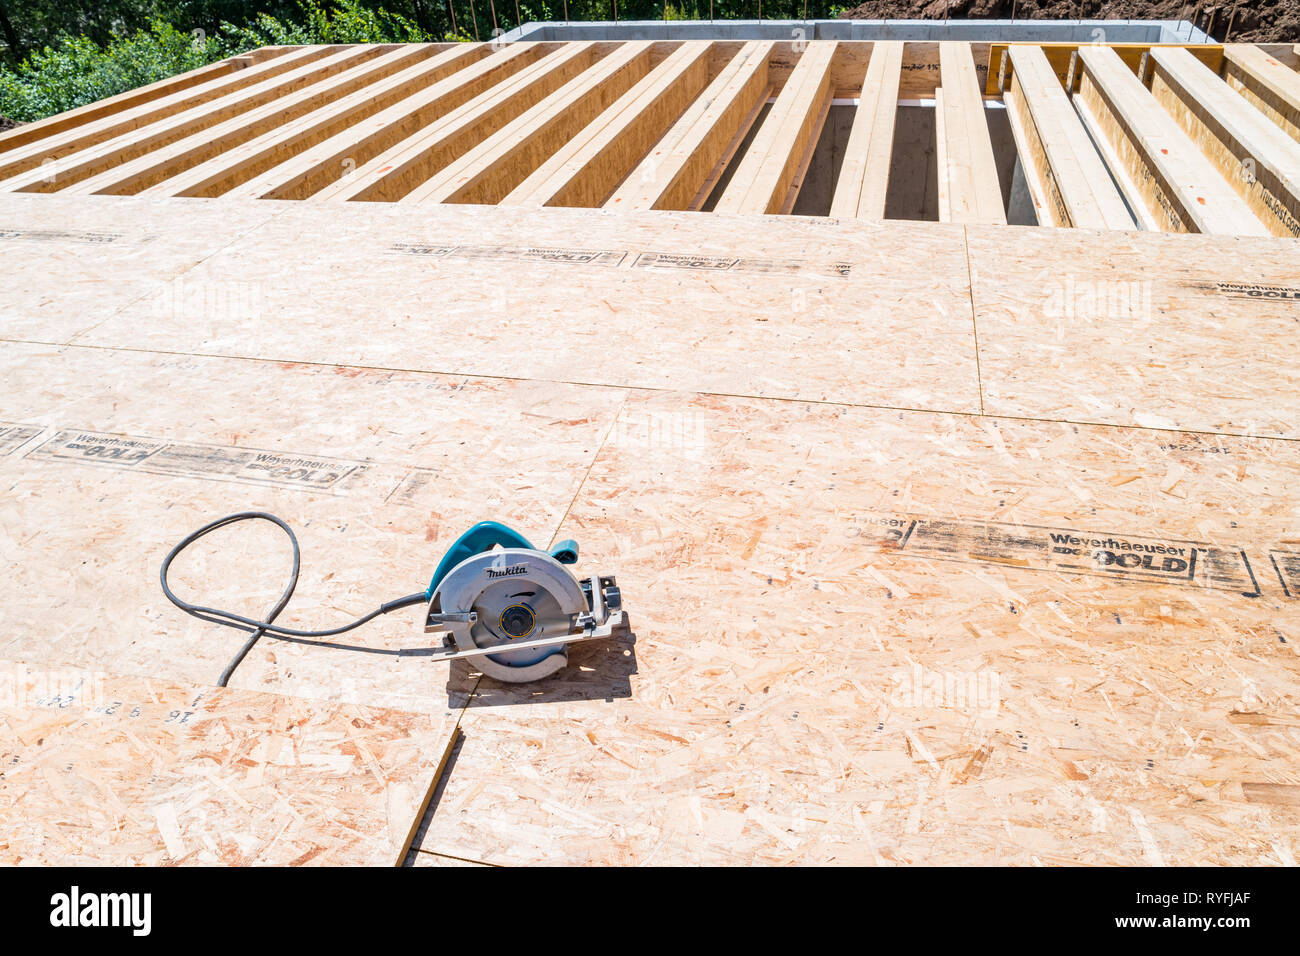 Circular hand saw and underfloor particleboard during house construction Stock Photo